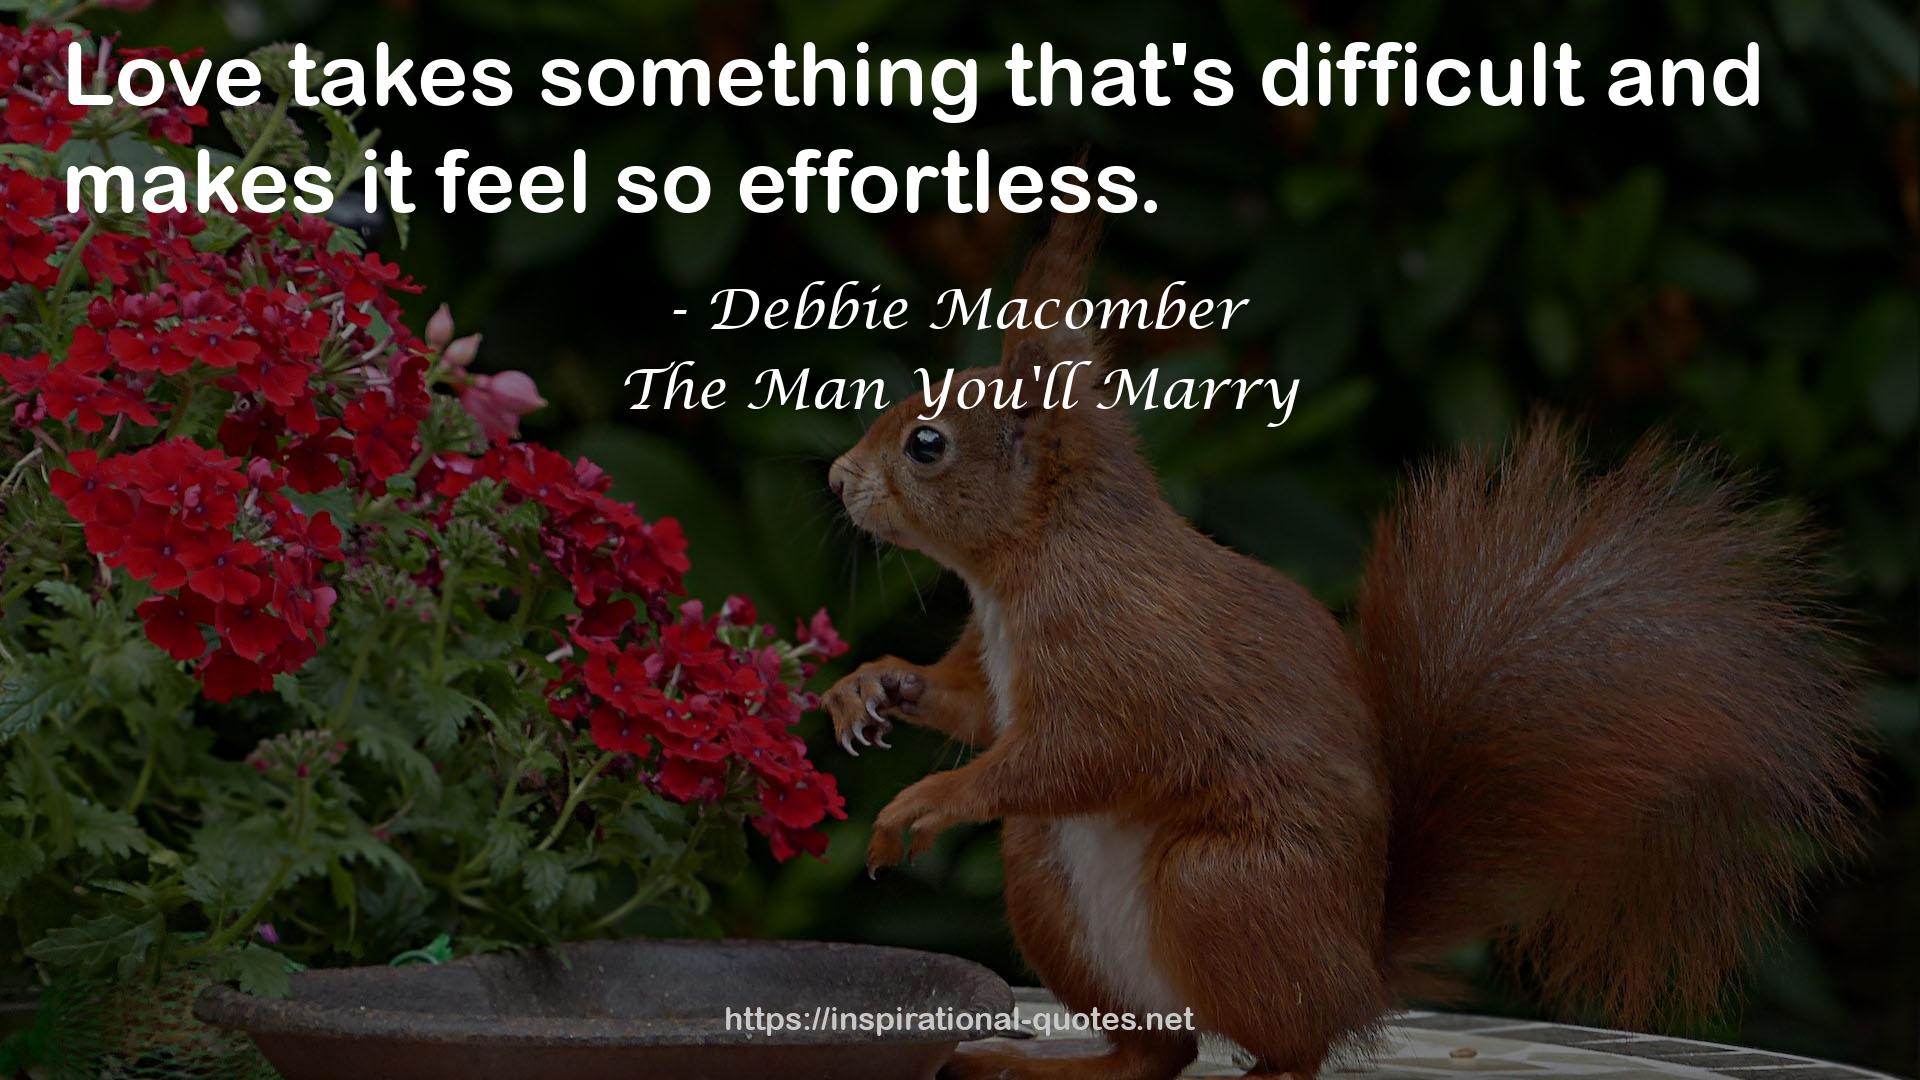 The Man You'll Marry QUOTES